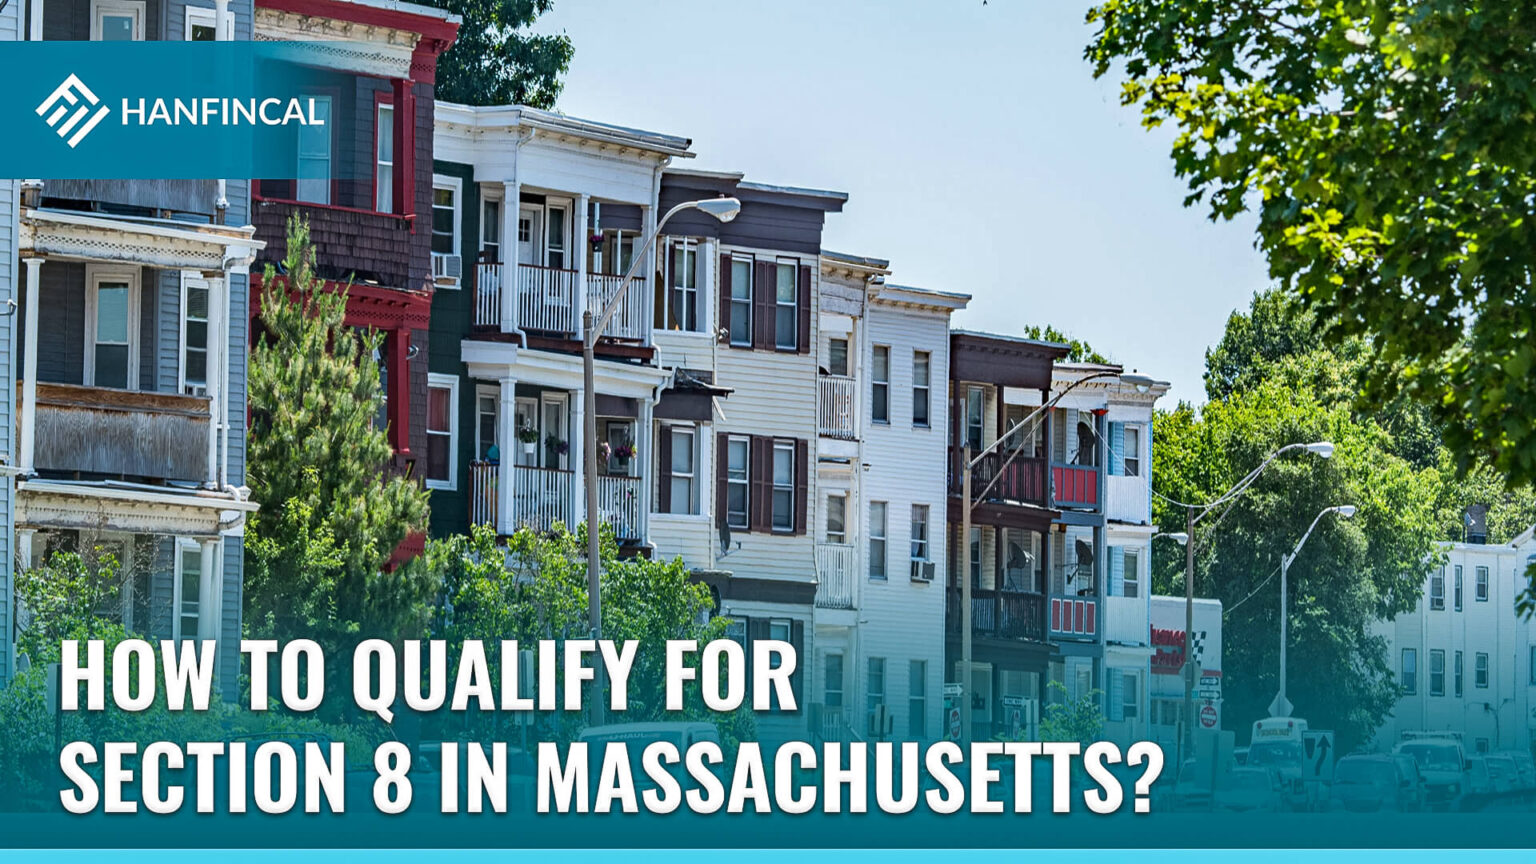 how-to-apply-for-section-8-in-massachusetts-02-2023-hanfincal